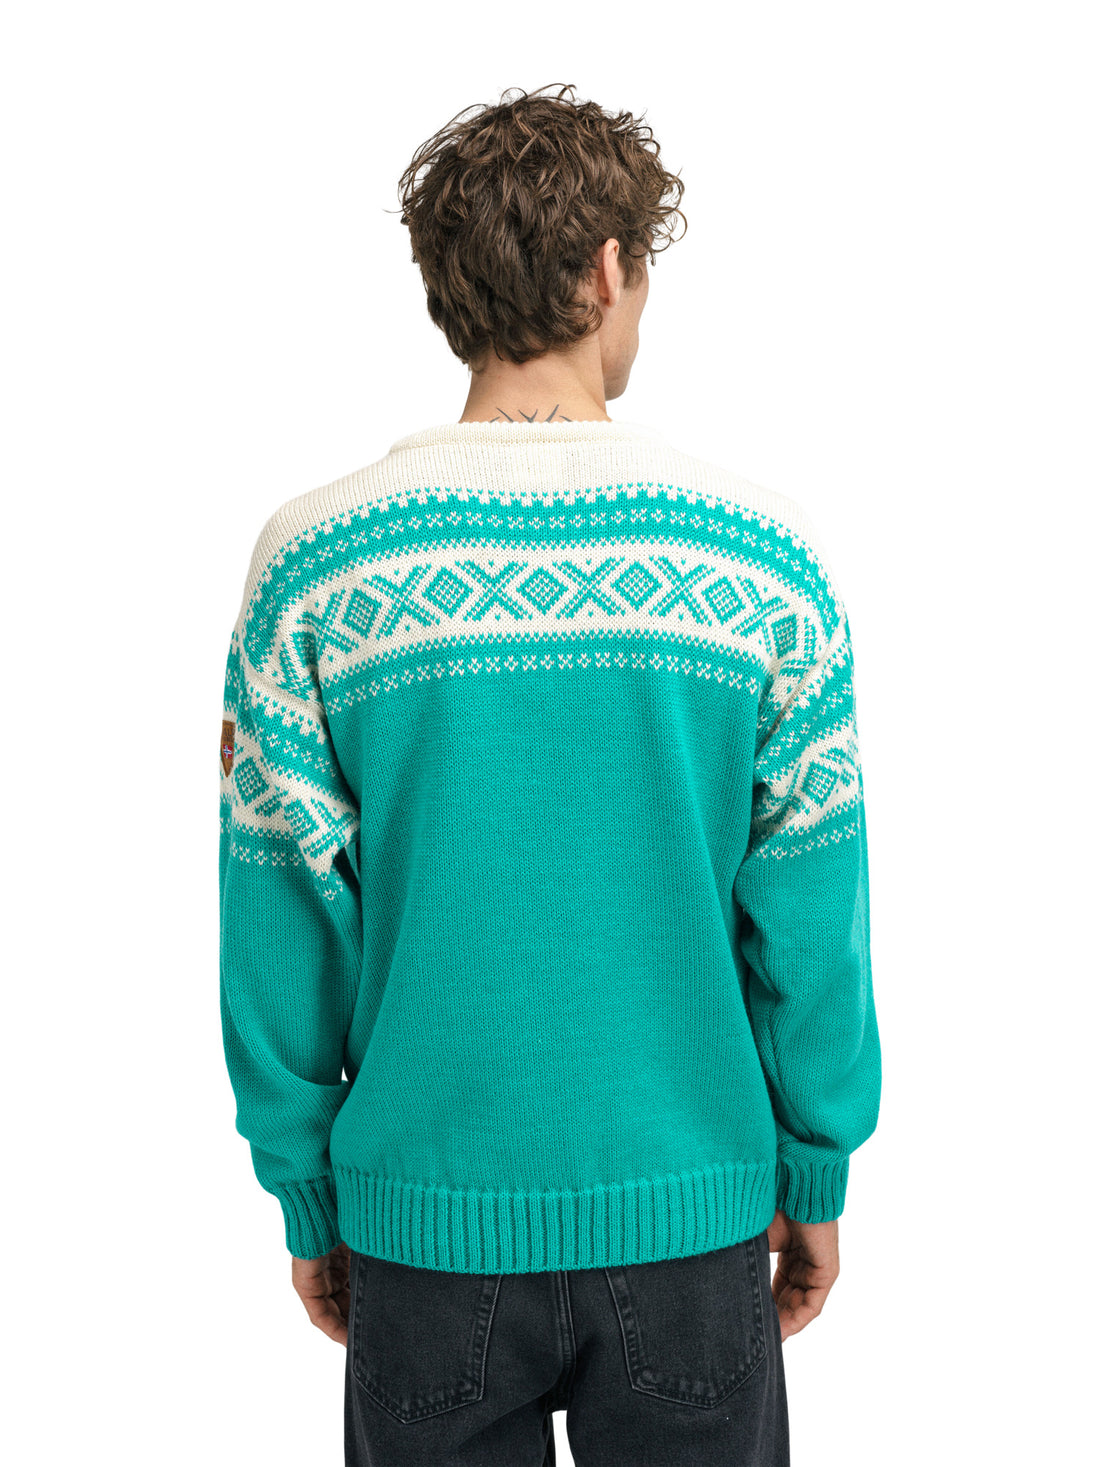 Dale of Norway - Cortina 1956 Unisex Sweater - Peacock offwhite